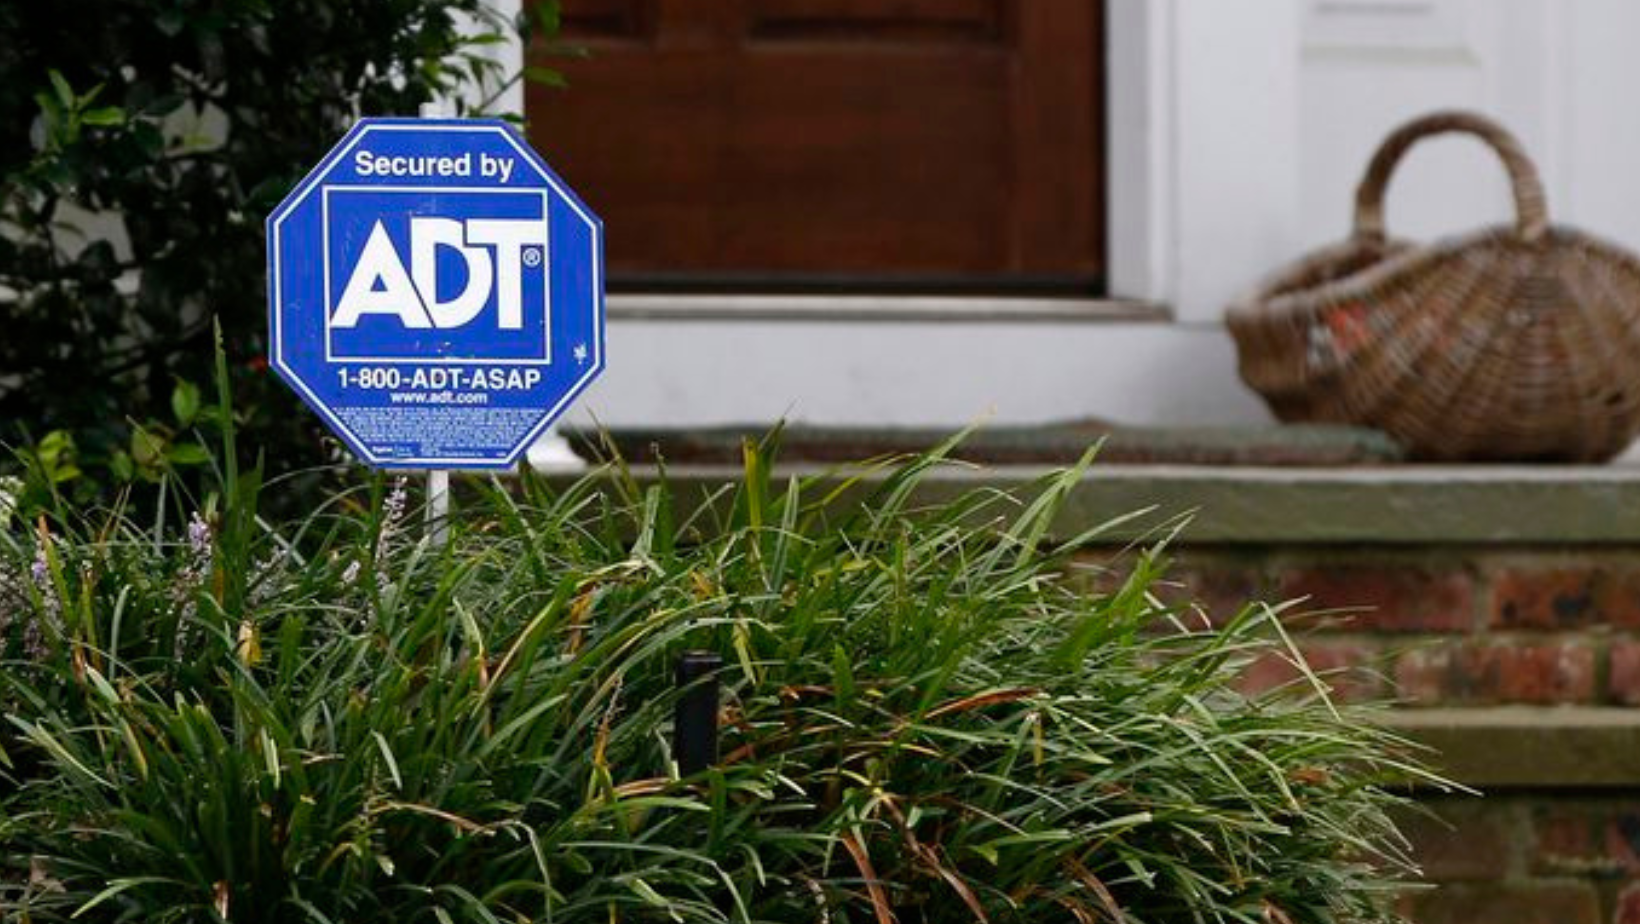 Security firm ADT's commercial unit to be taken private by GTCR for $1.6 bln